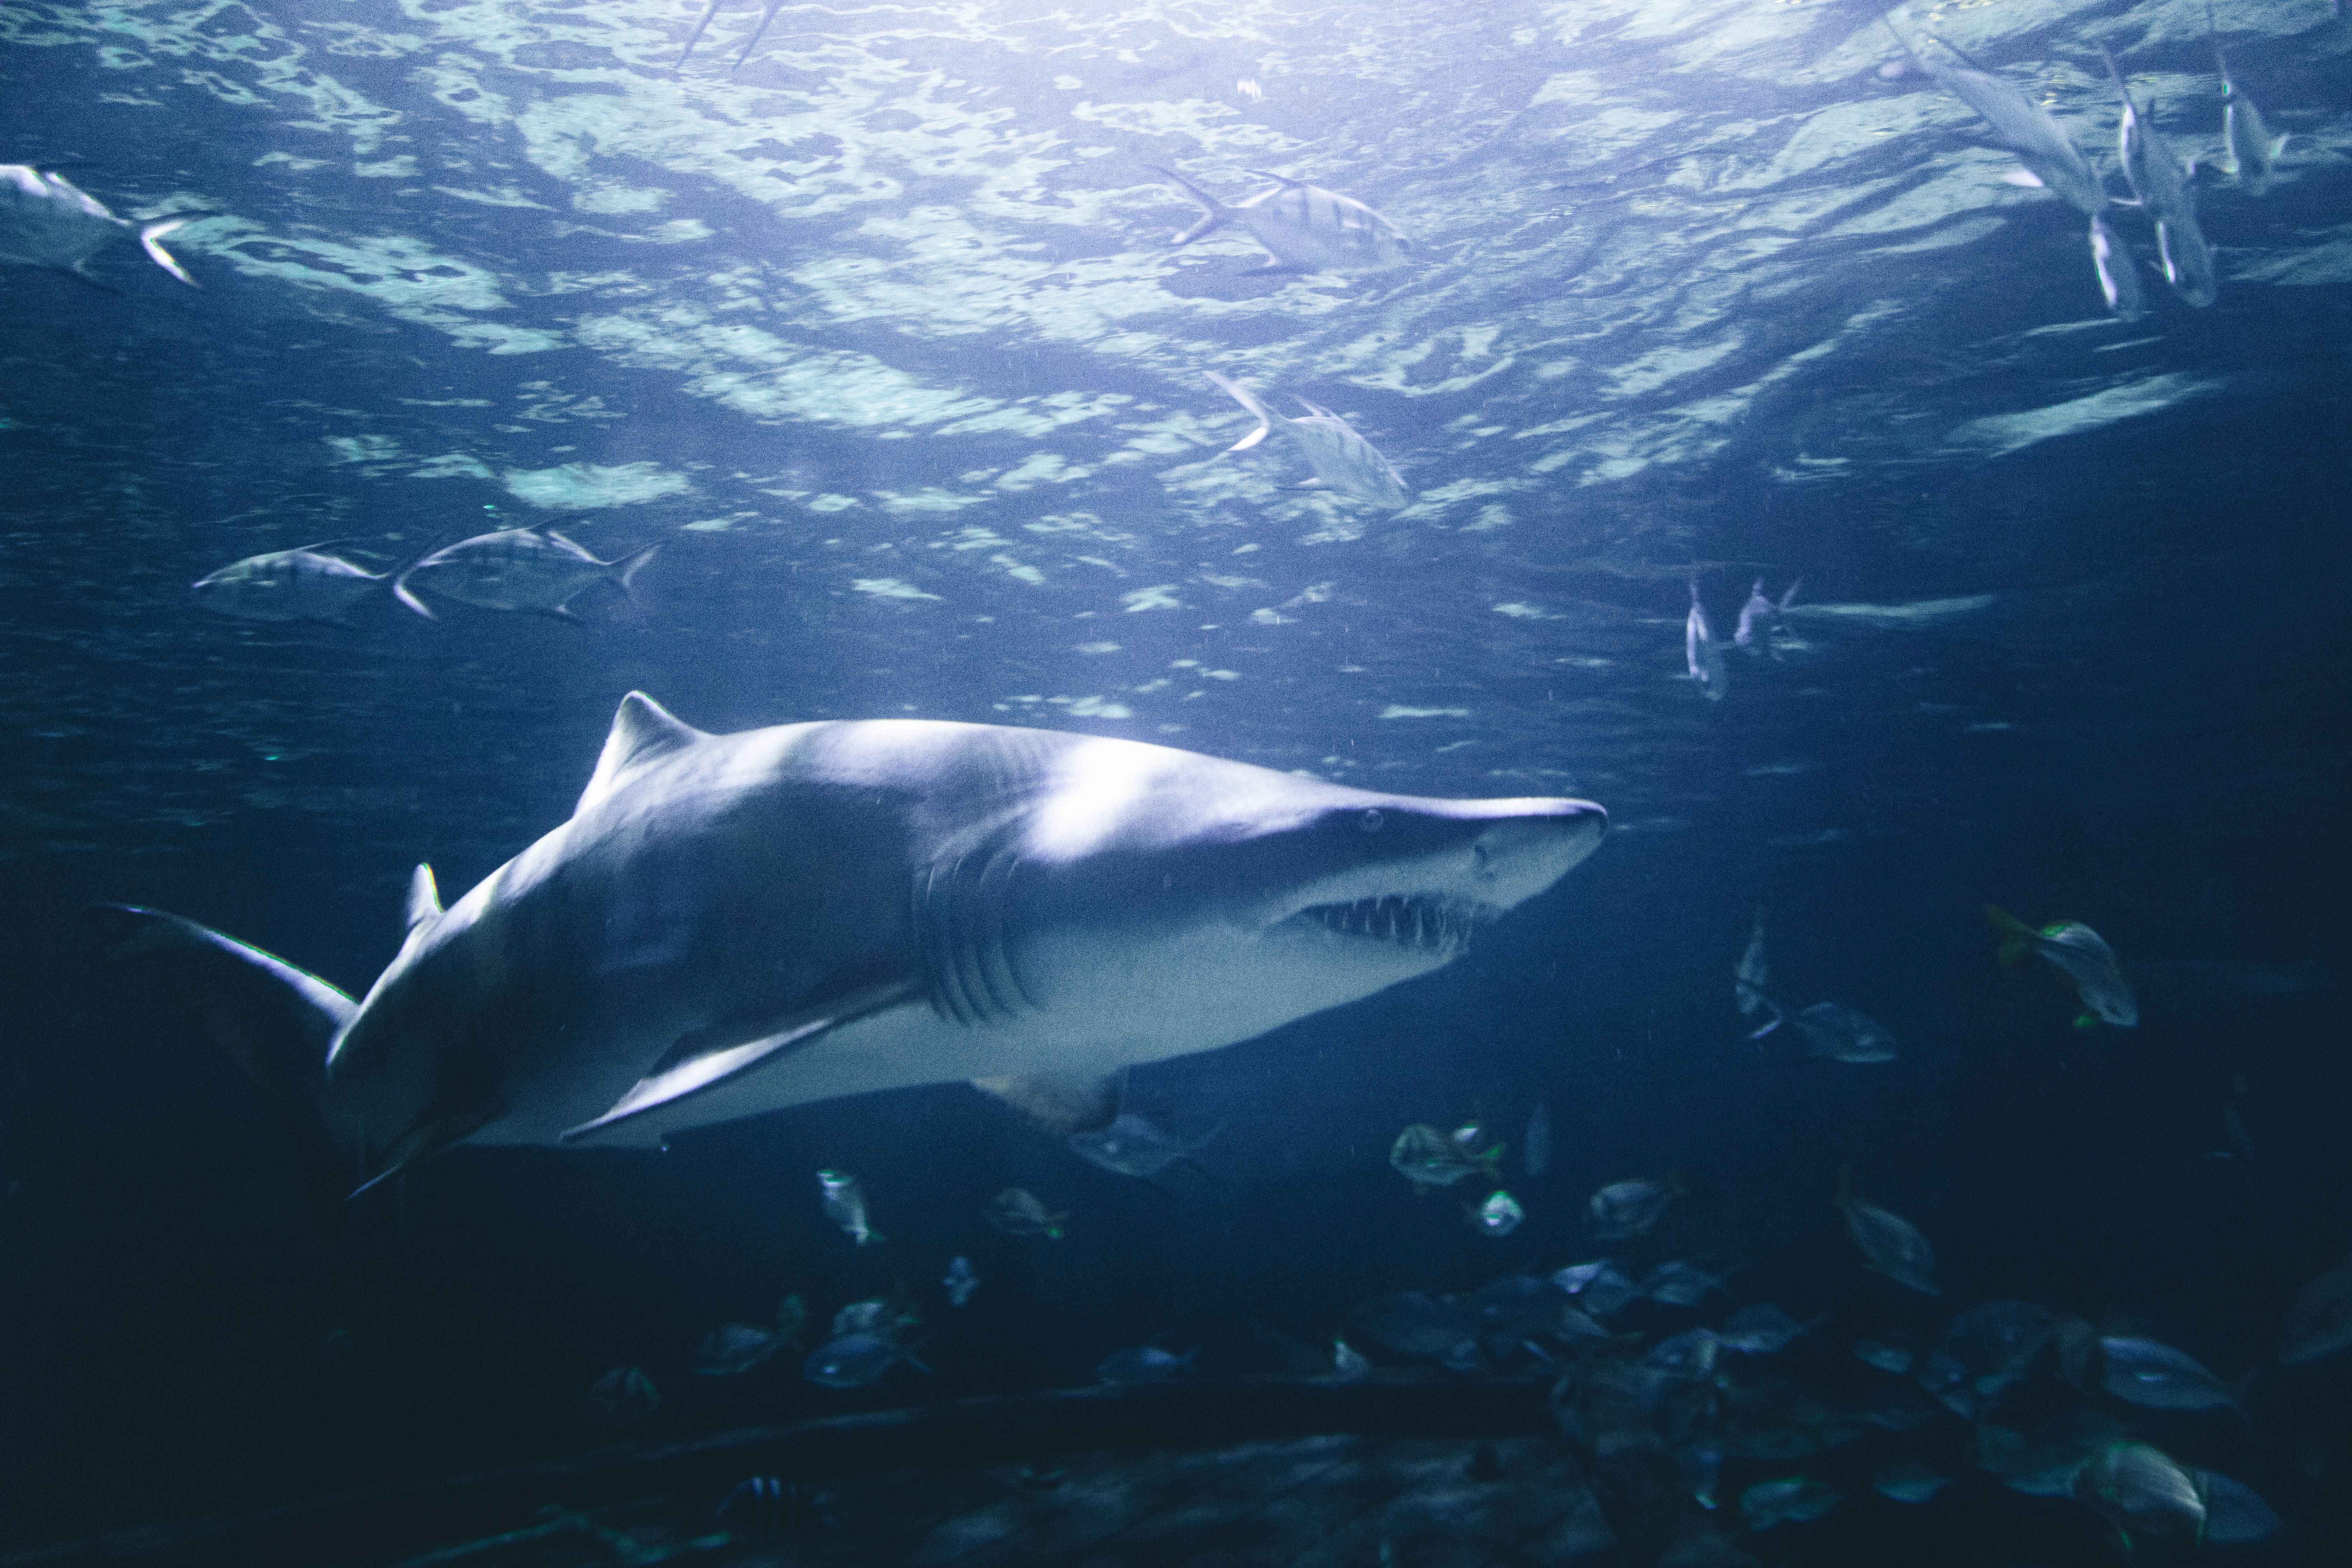 The Deepest Detected Shark Dives: How Deep Do They Go?